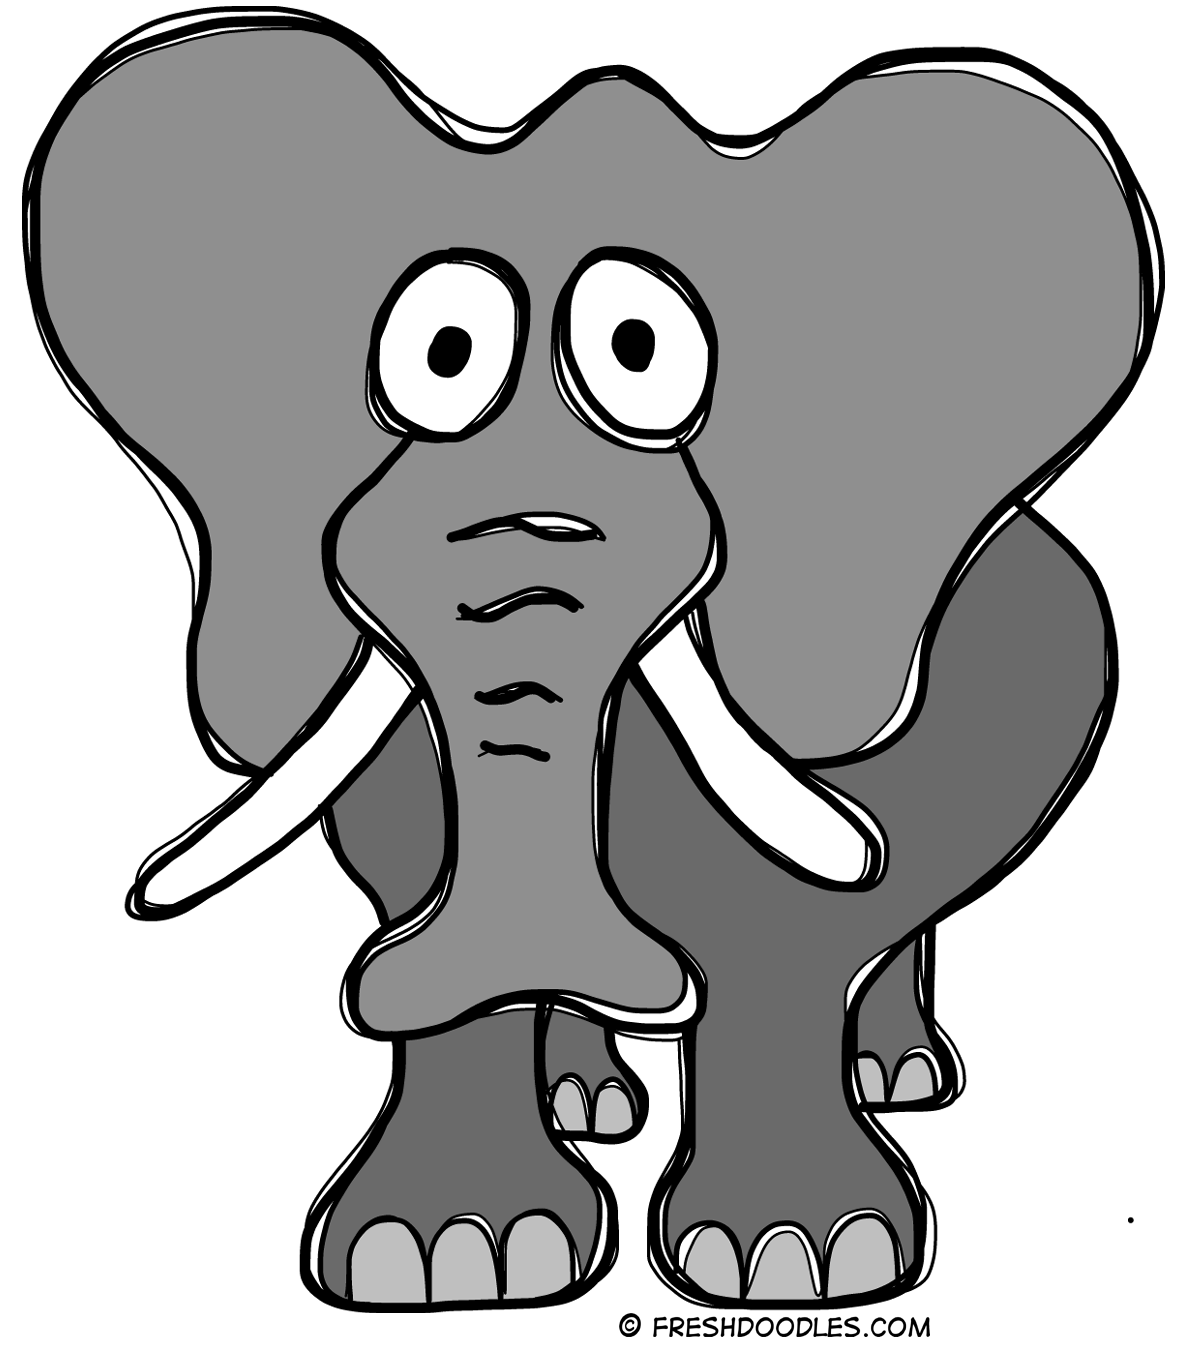 clipart image of an elephant - photo #18